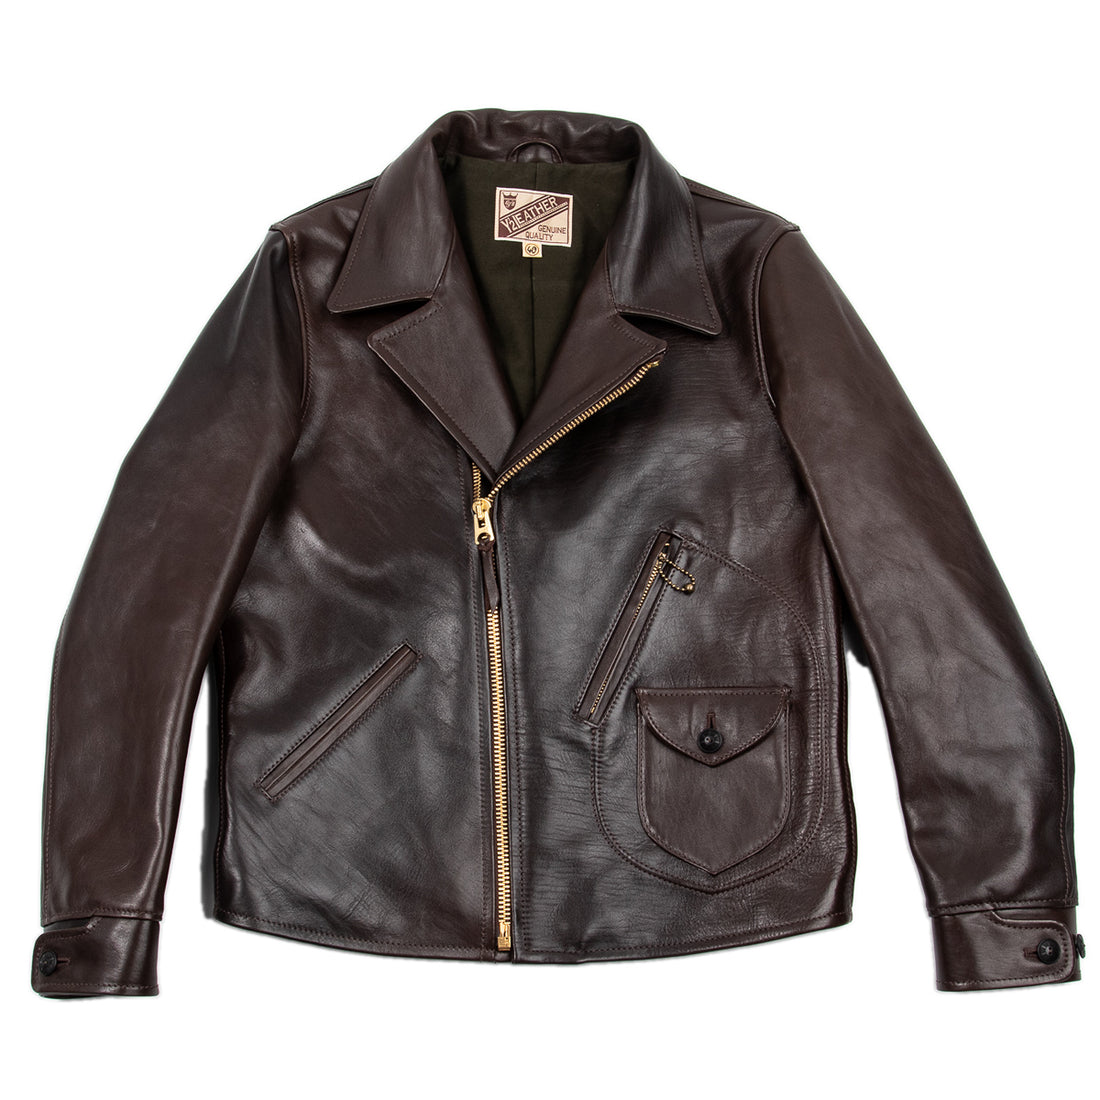 How To Condition A Leather Jacket - an indigo day